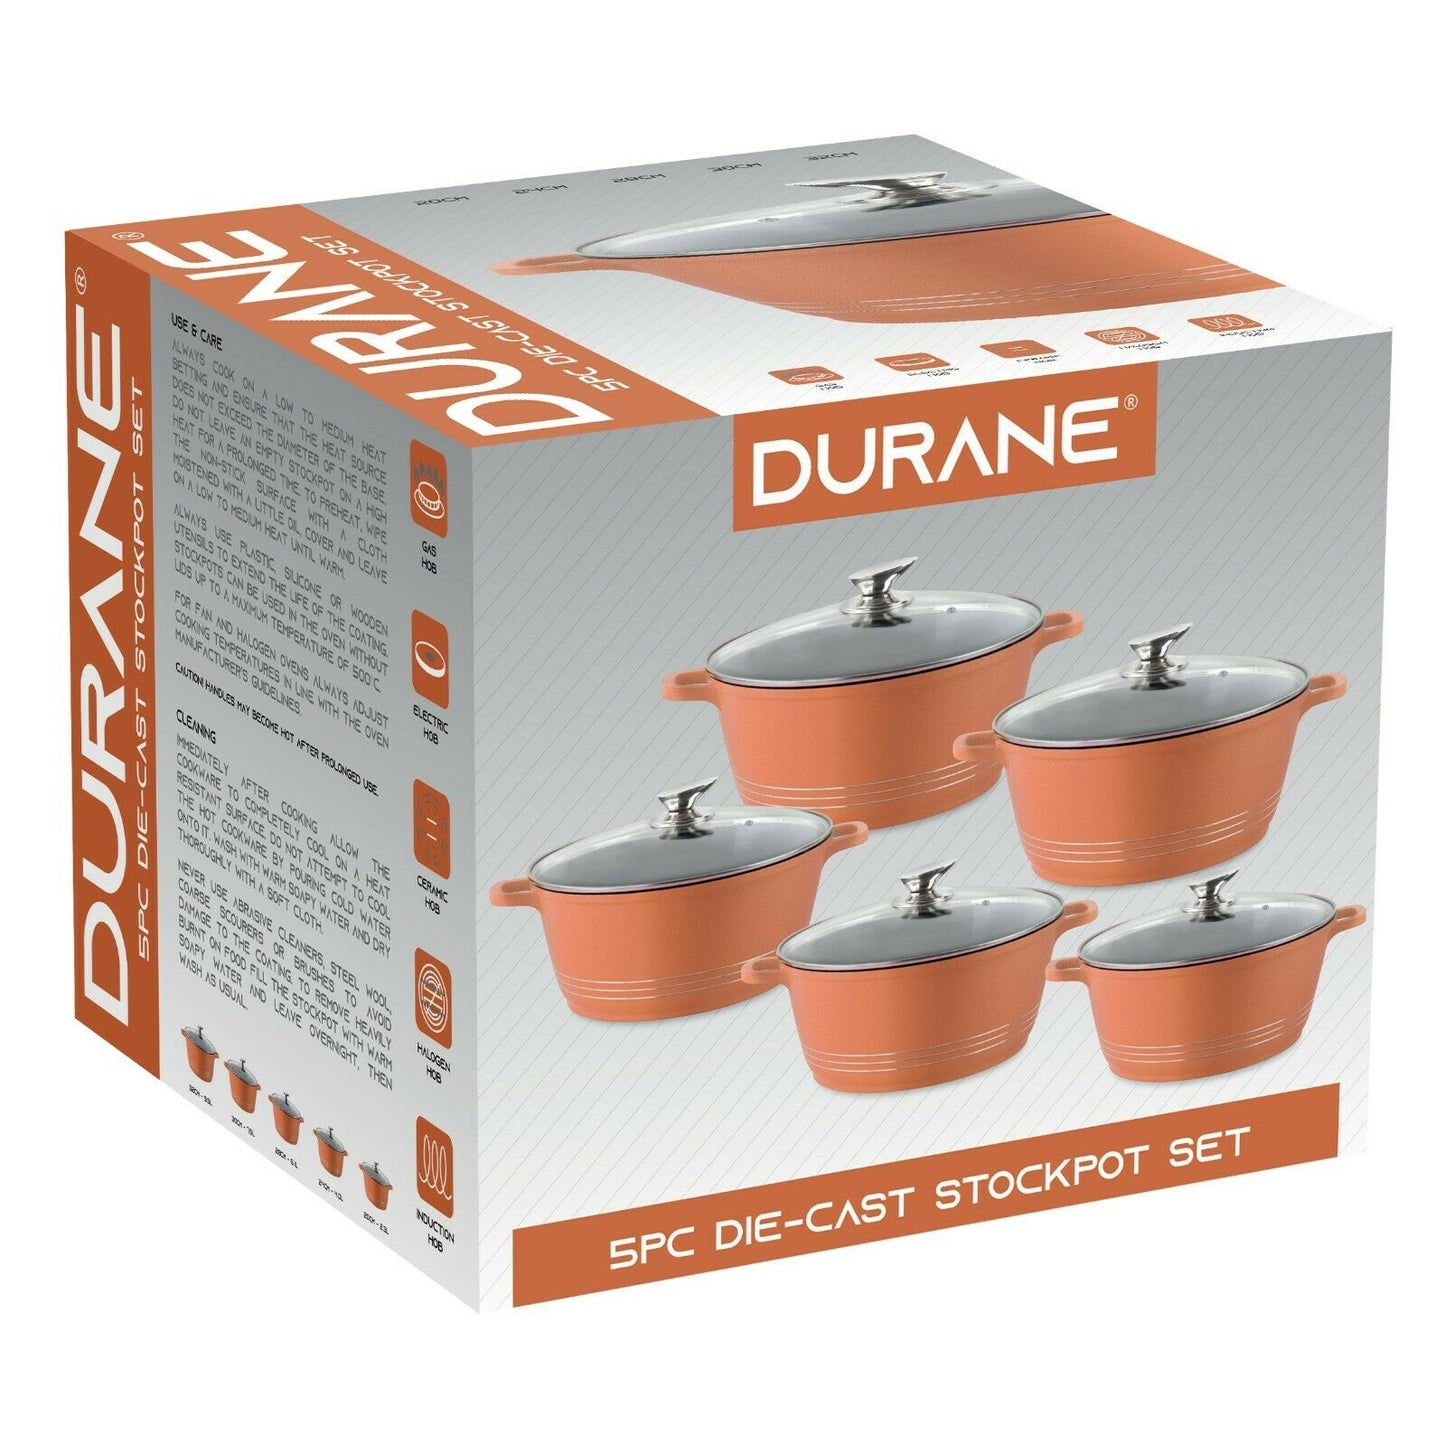 Durane Copper Die Cast Stock Pot Set Of 5 Stainless Steel Non Stick Coating With 2 Handles 20-24-28-30-32cm 9630 (Big Parcel Rate)